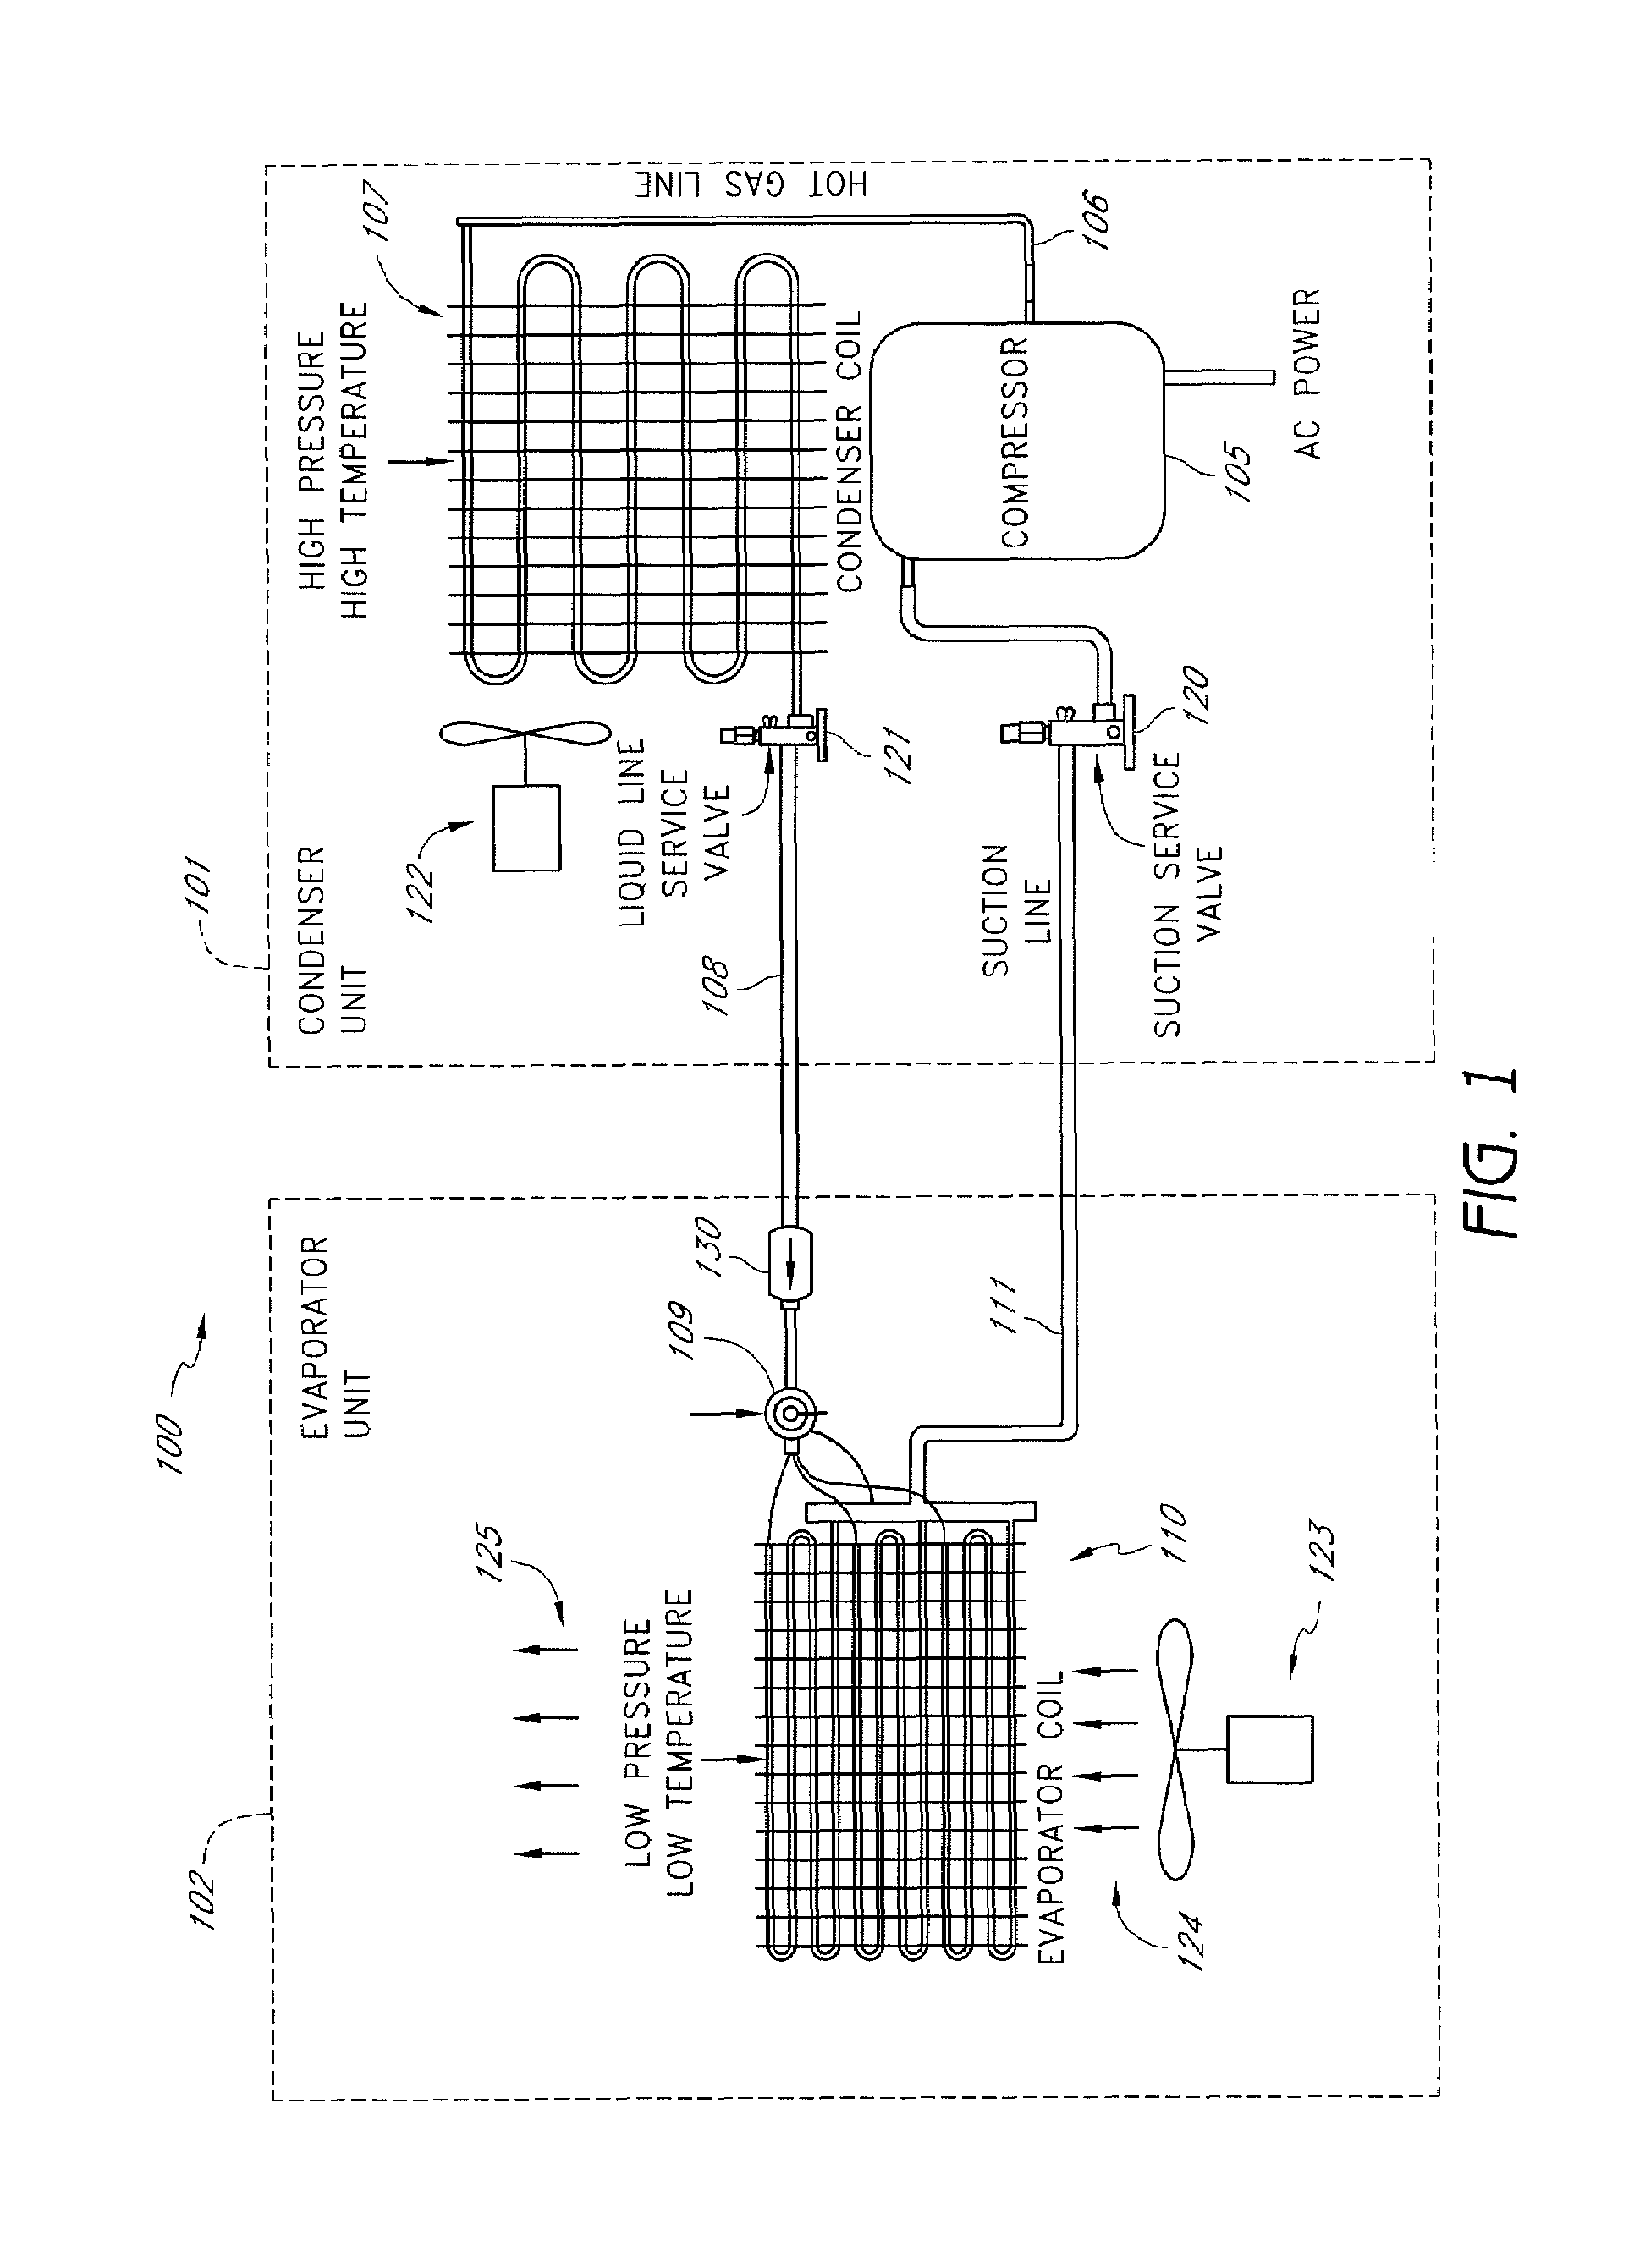 Method and apparatus for monitoring a calibrated condenser unit in a refrigerant-cycle system